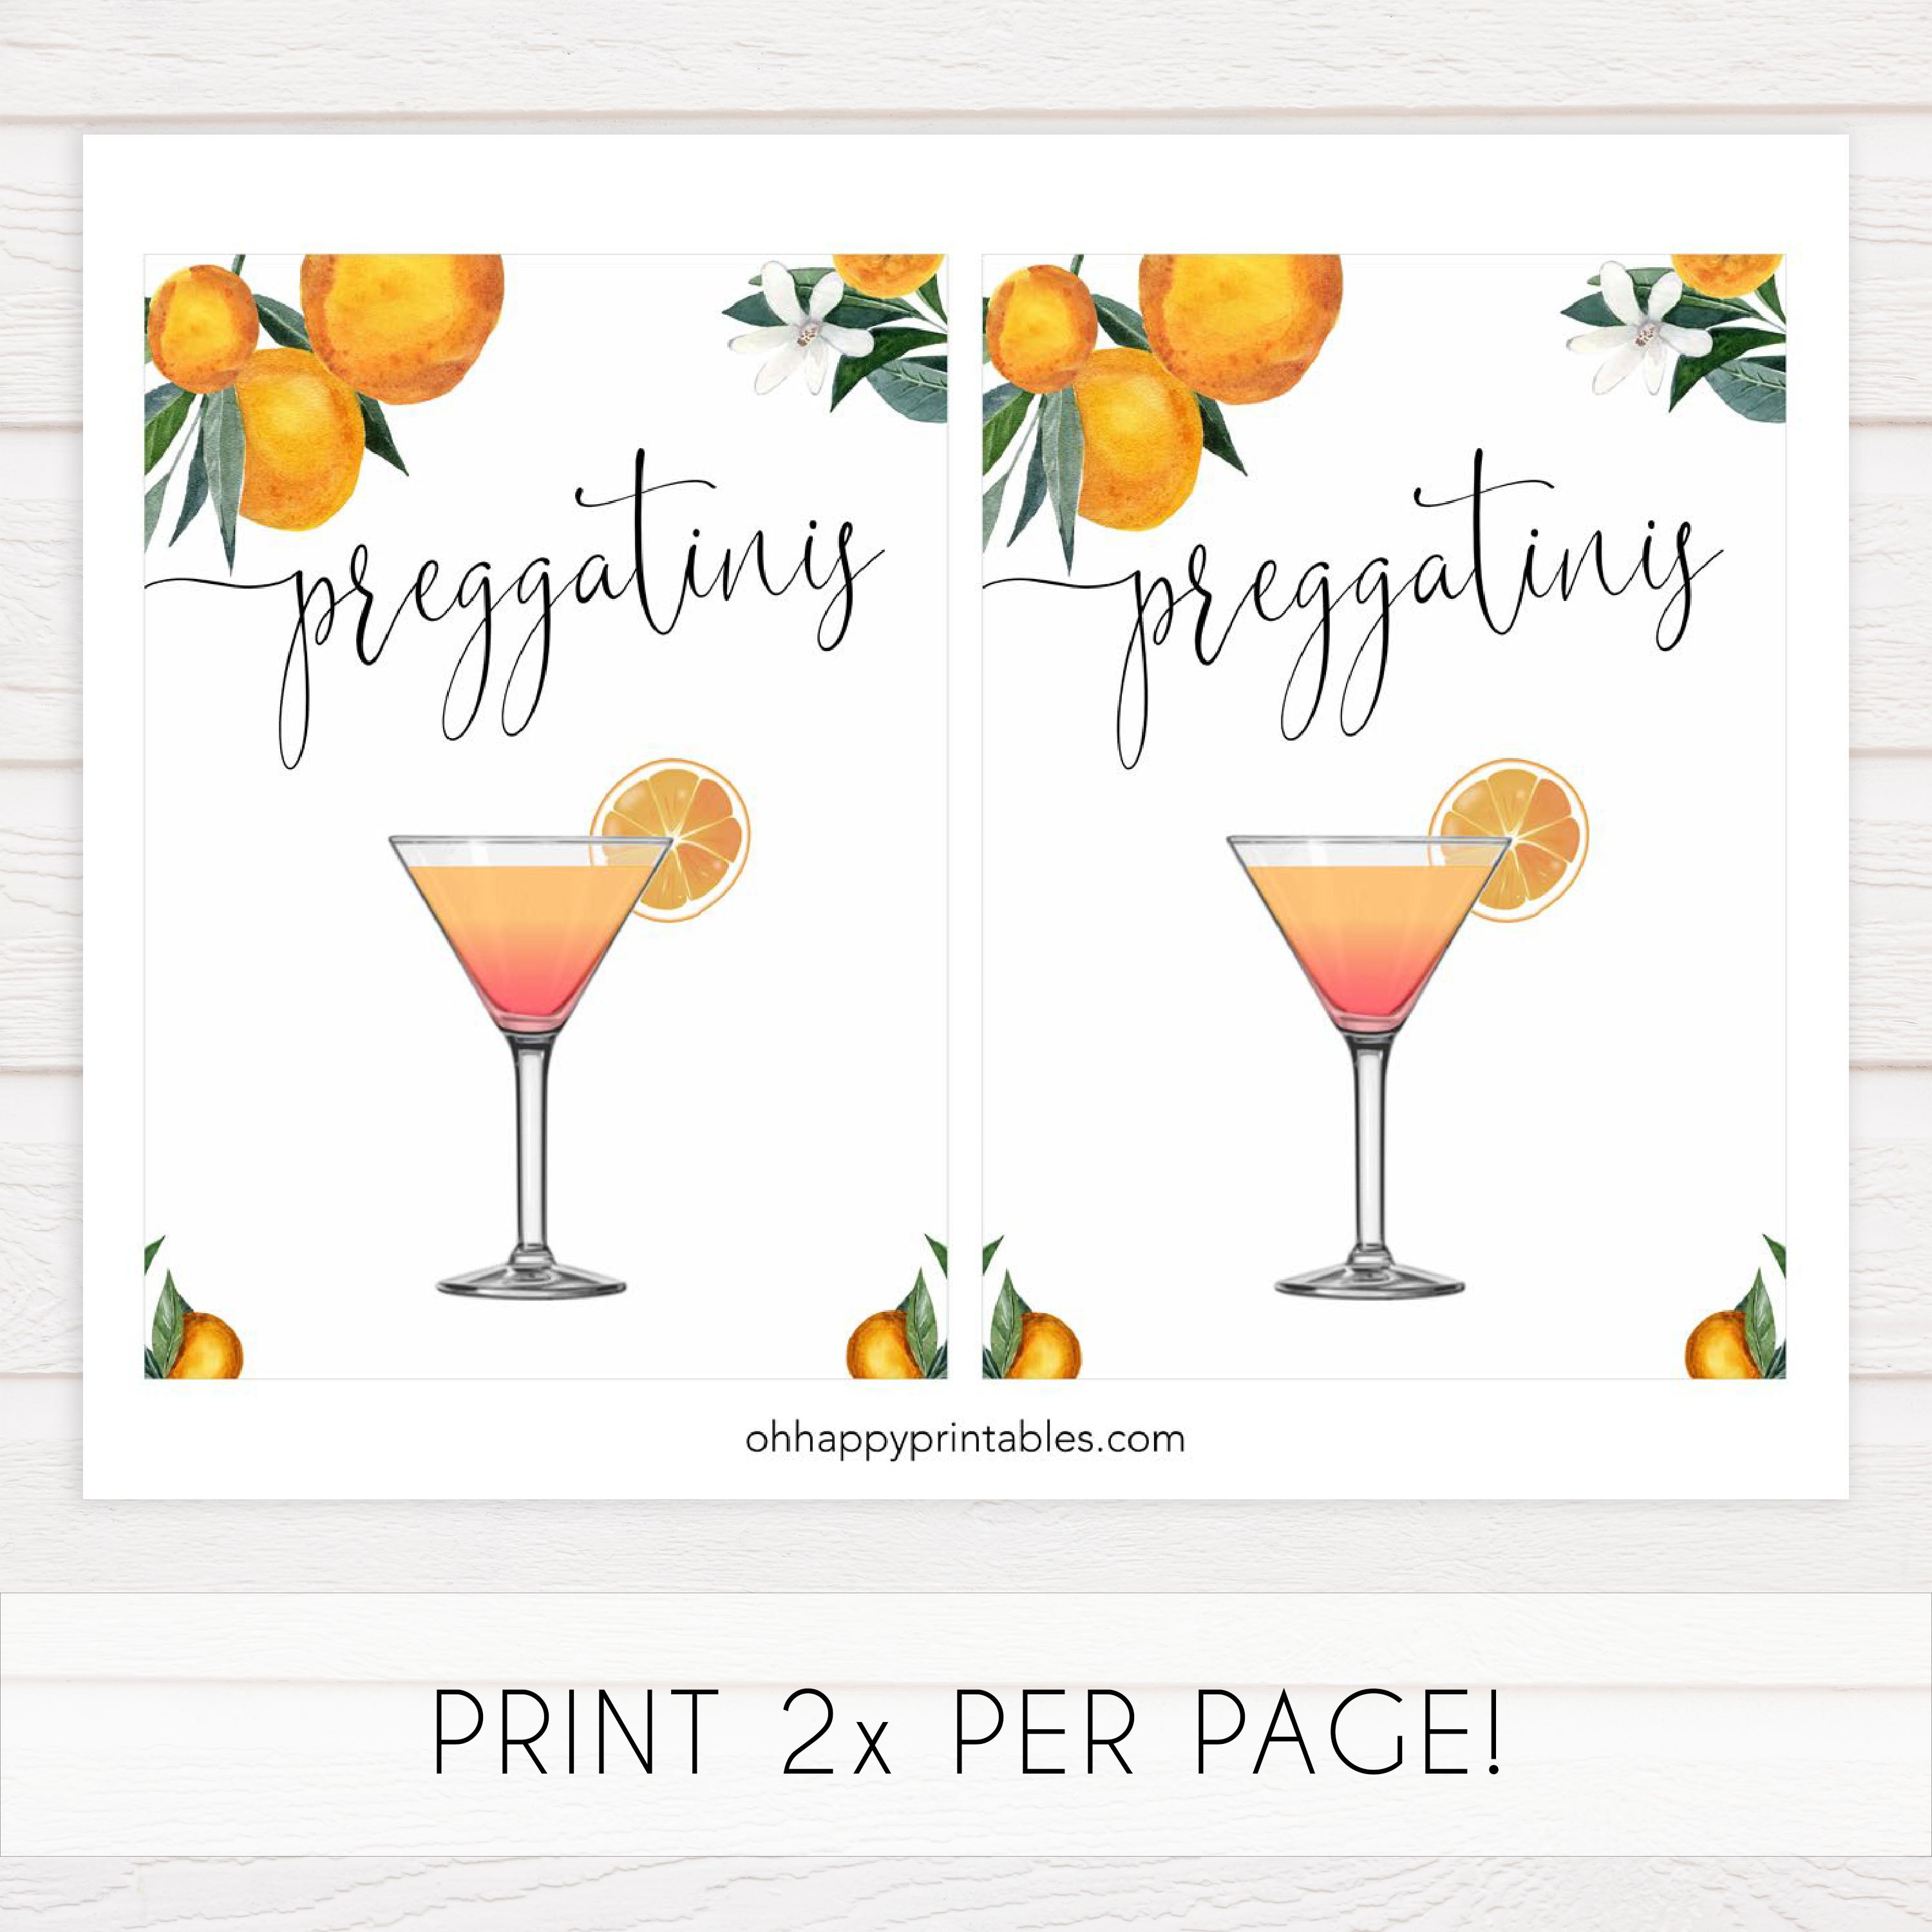 preggatinis baby shower table signs, Little cutie baby decor, printable baby table signs, printable baby decor, baby little cutie table signs, fun baby signs, baby little cutie fun baby table signs, citrus baby shower signs,